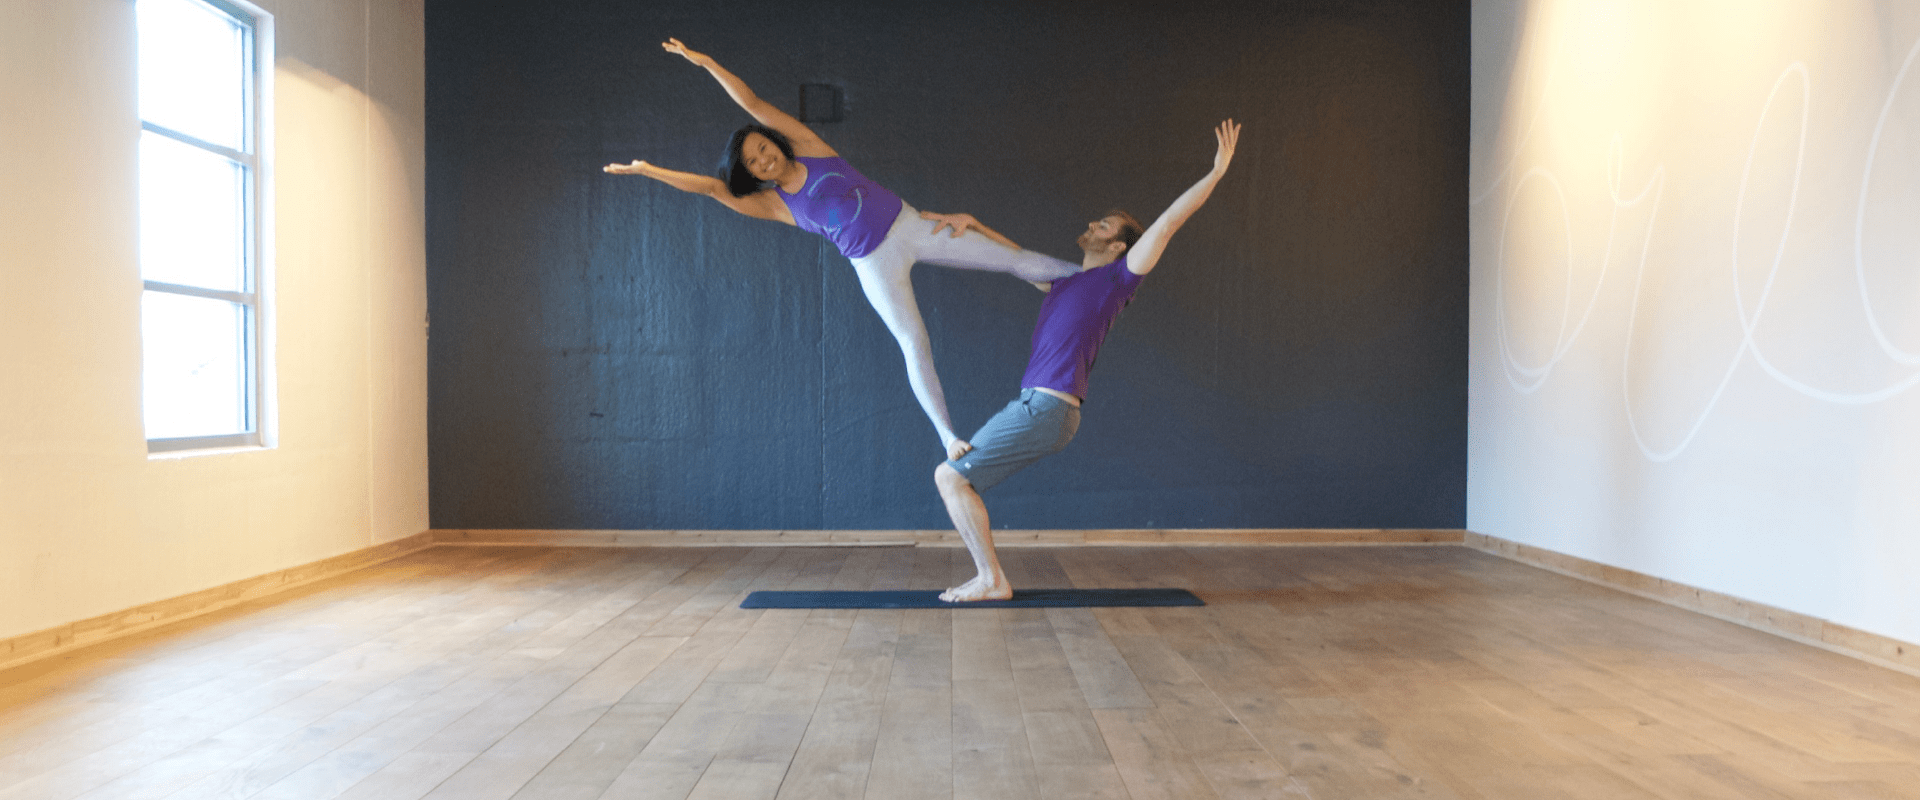 Acro yoga the best of two worlds - Campbell River Mirror